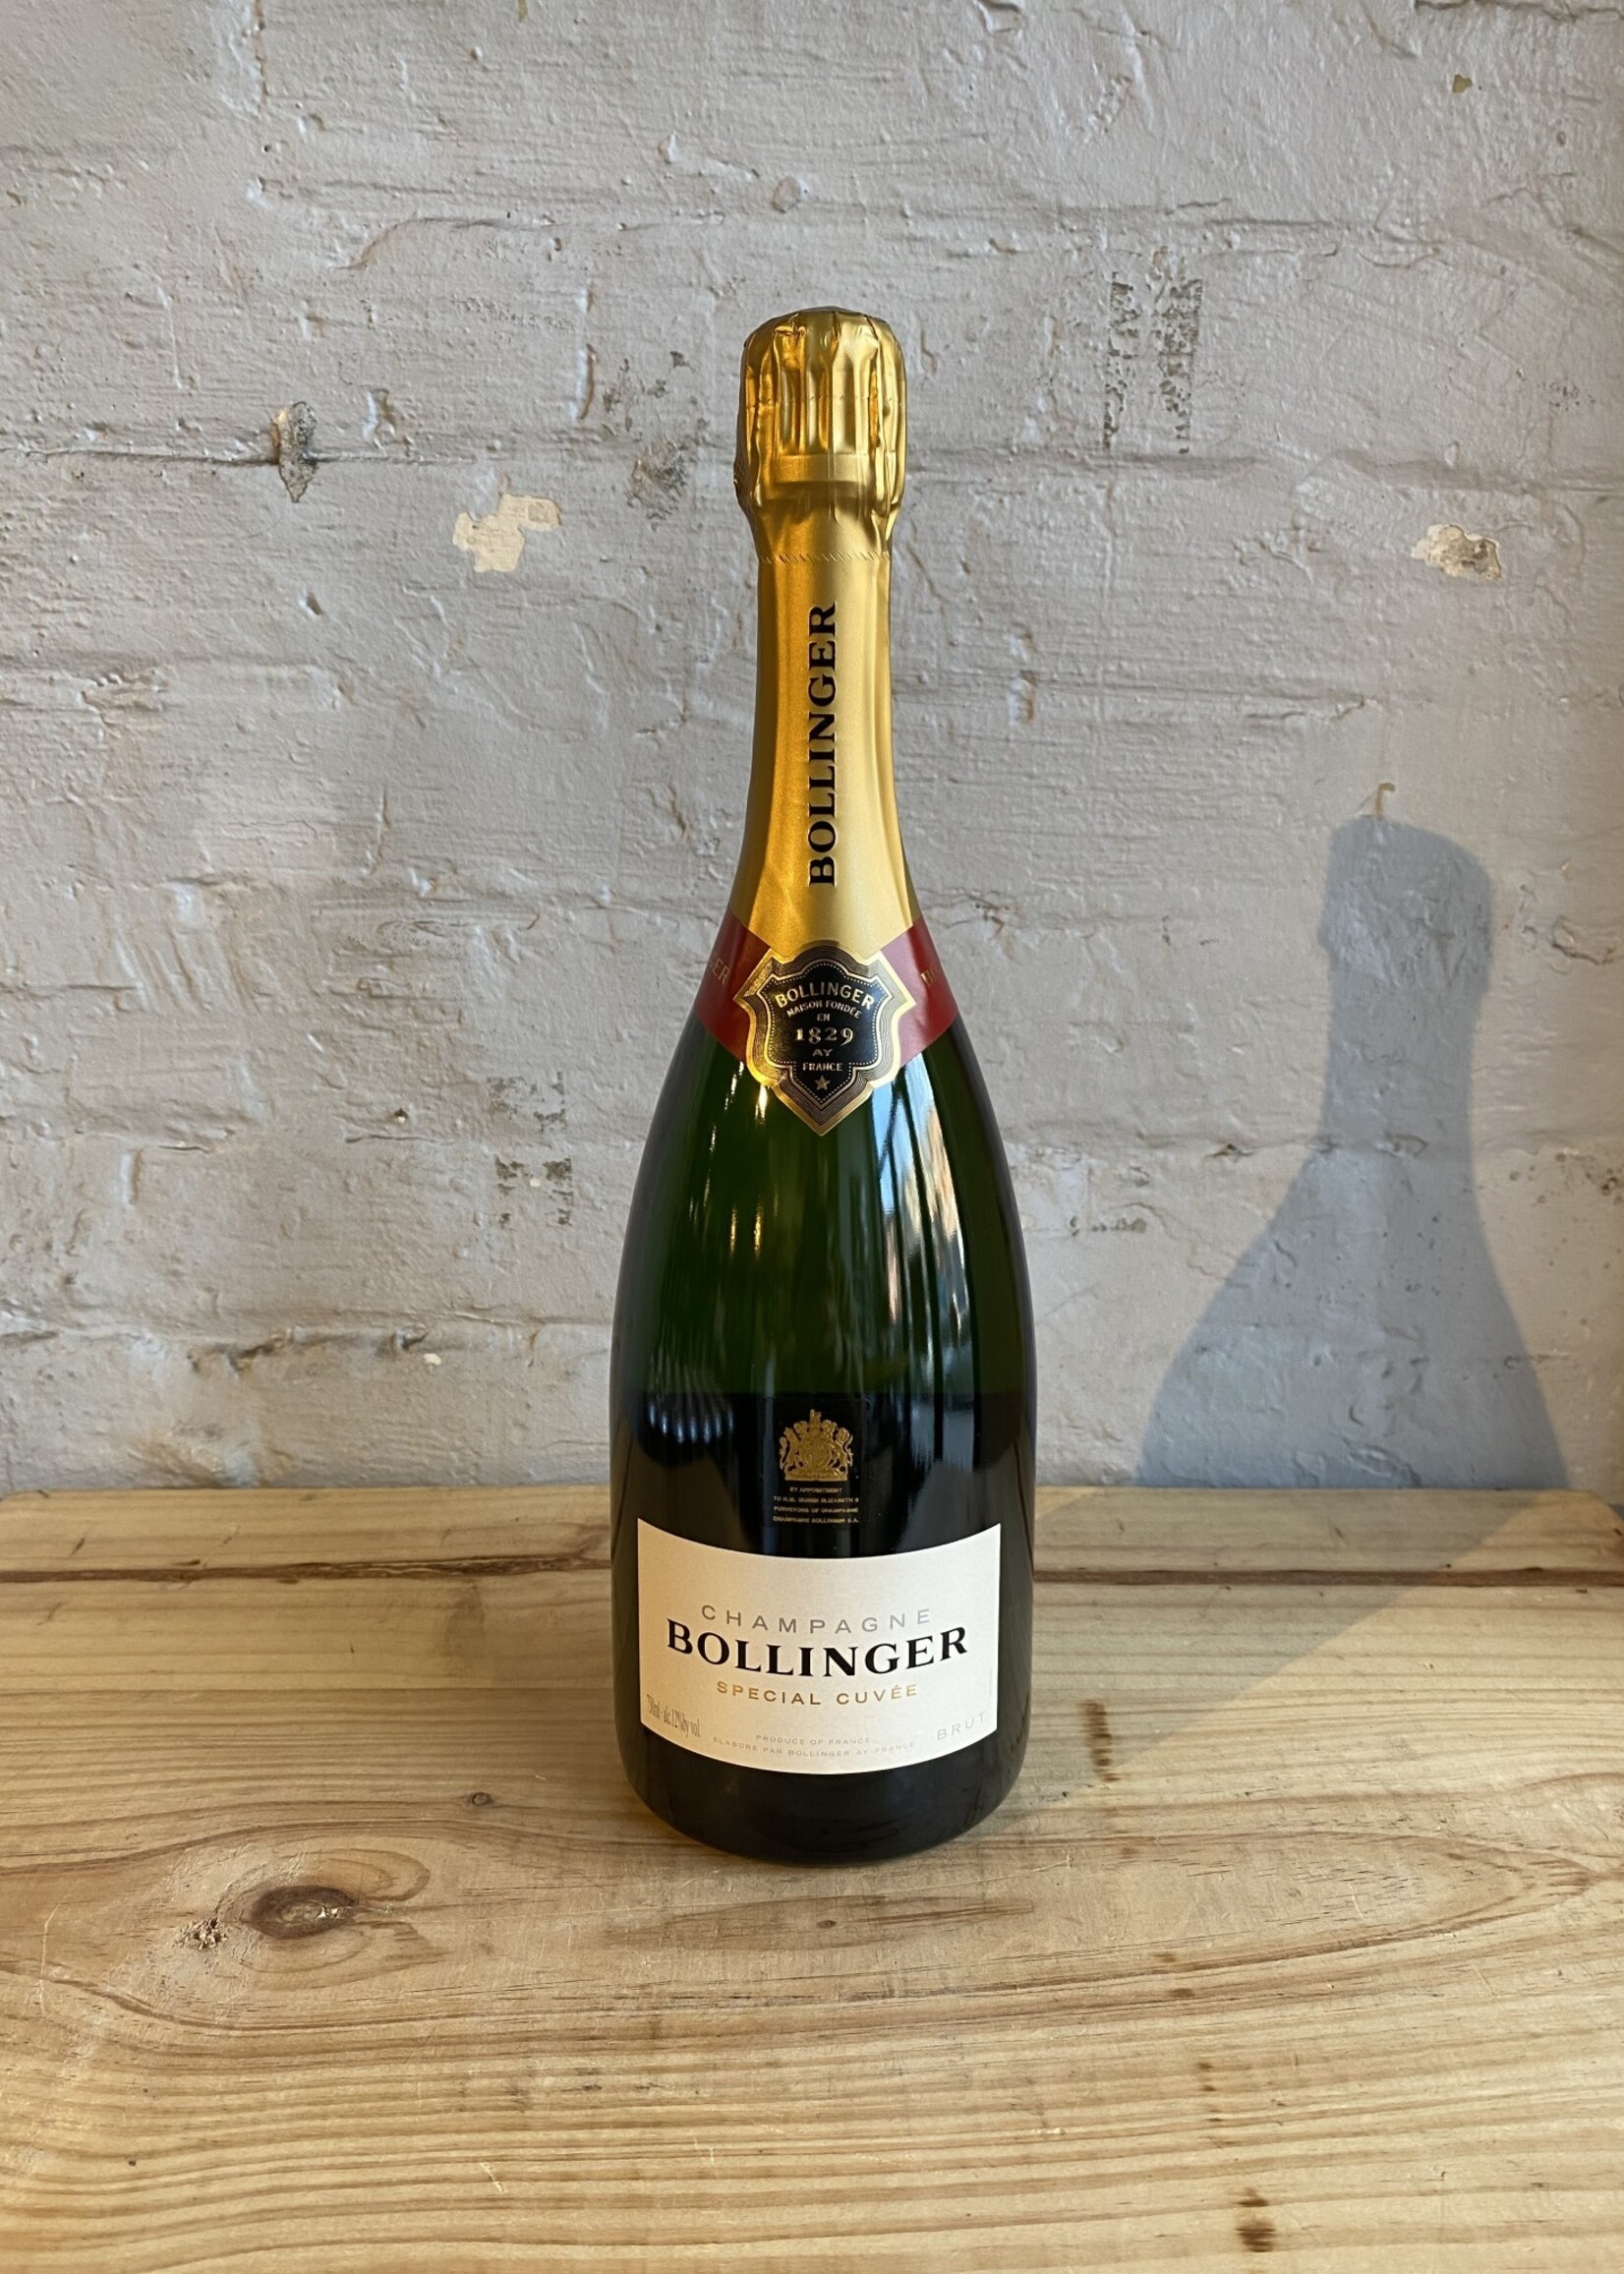 Wine NV Bollinger Special Cuvee - Champagne, France (750ml)